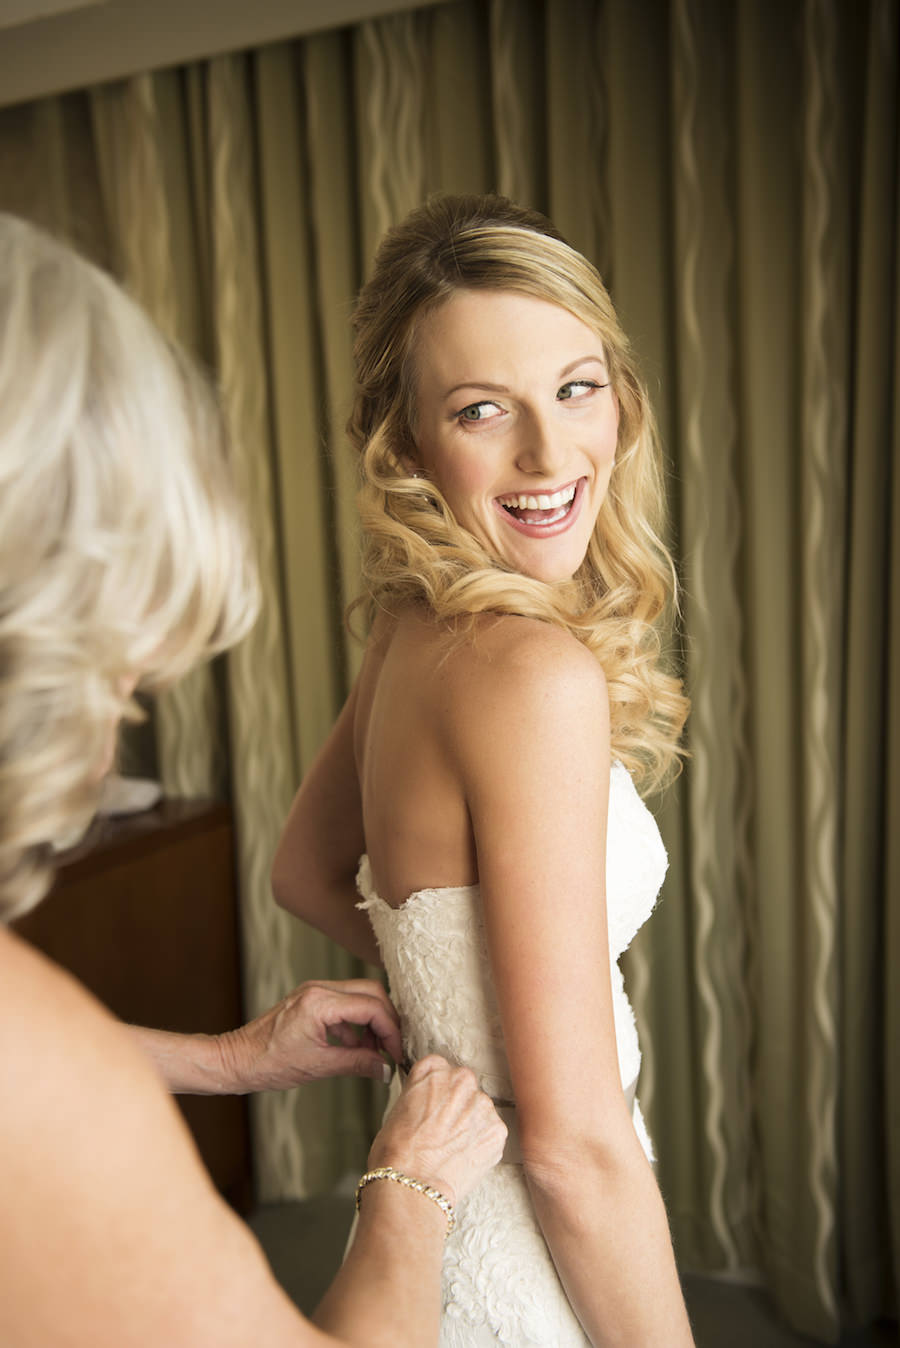 Bride Getting Dressed/Ready in White, Lace, Strapless Wedding Dress